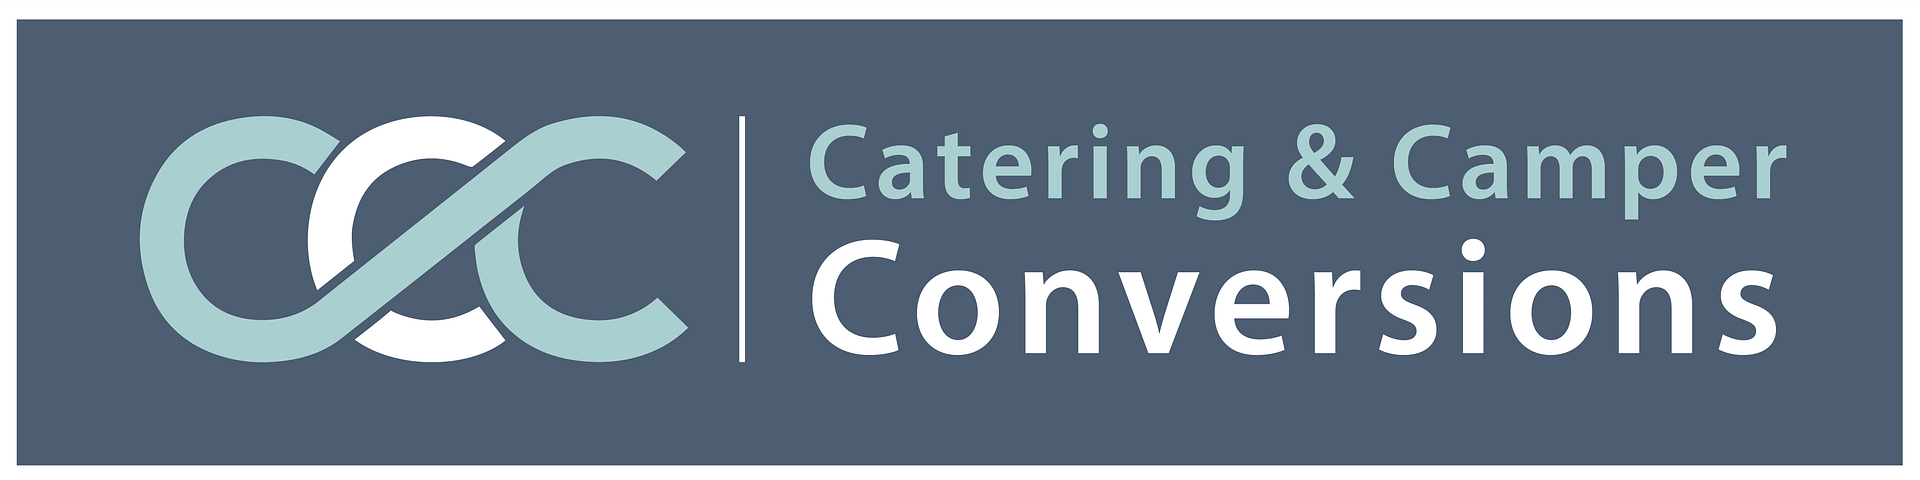 Catering and Camper Conversions